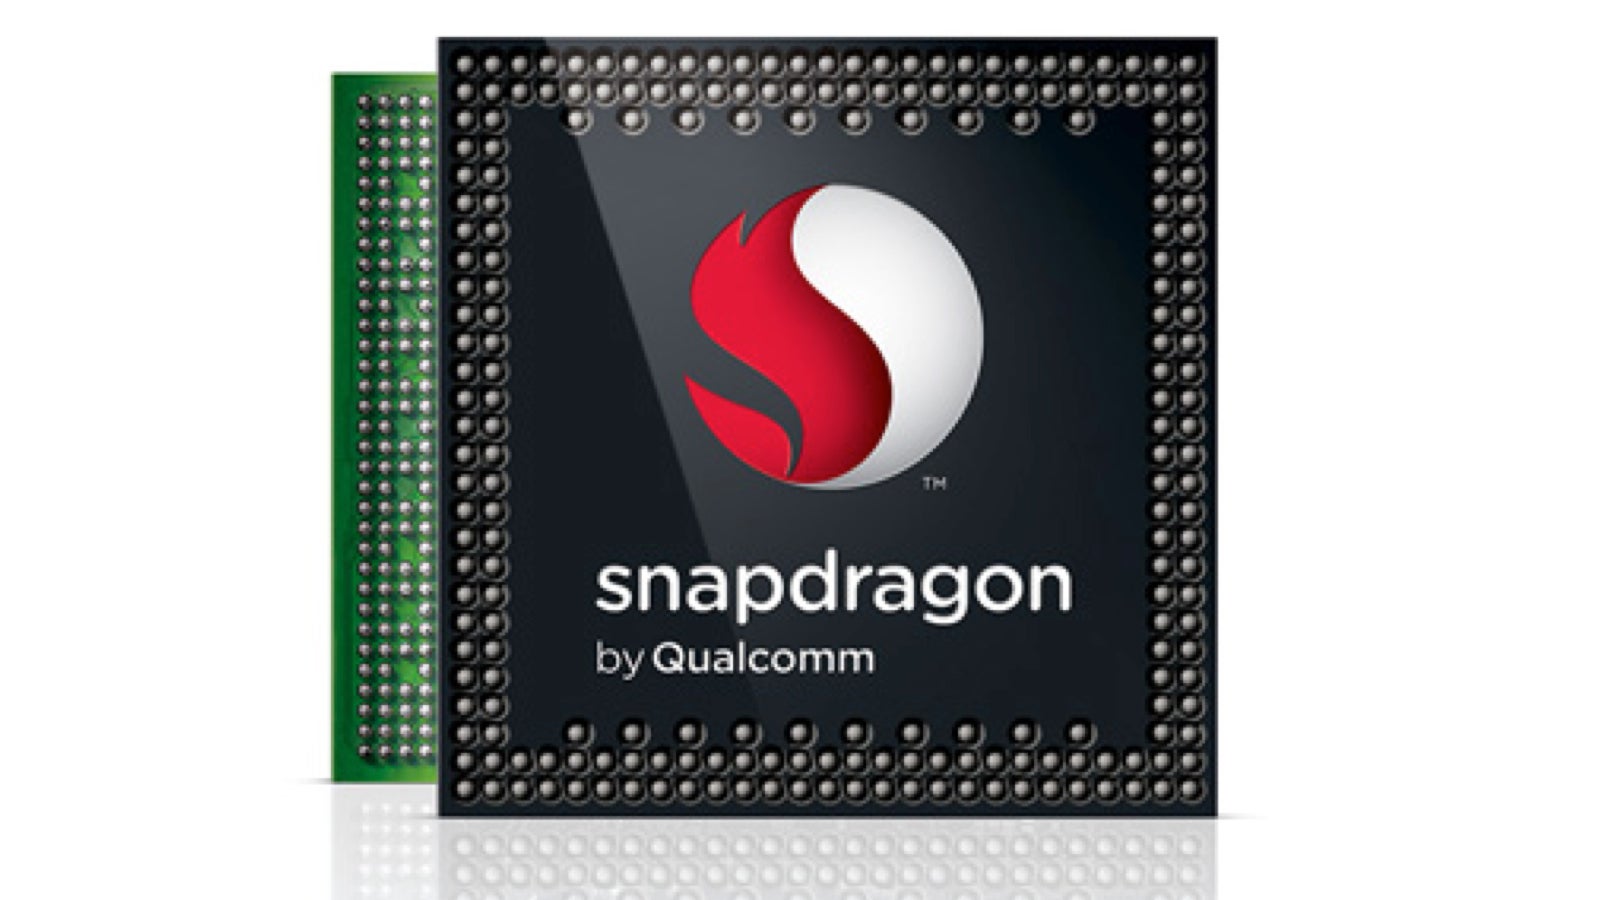 Will Apple use a Qualcomm Snapdragon processor in a low-priced Apple iPhone - Analysts: Low-cost Apple iPhone to be powered by Qualcomm Snapdragon processor